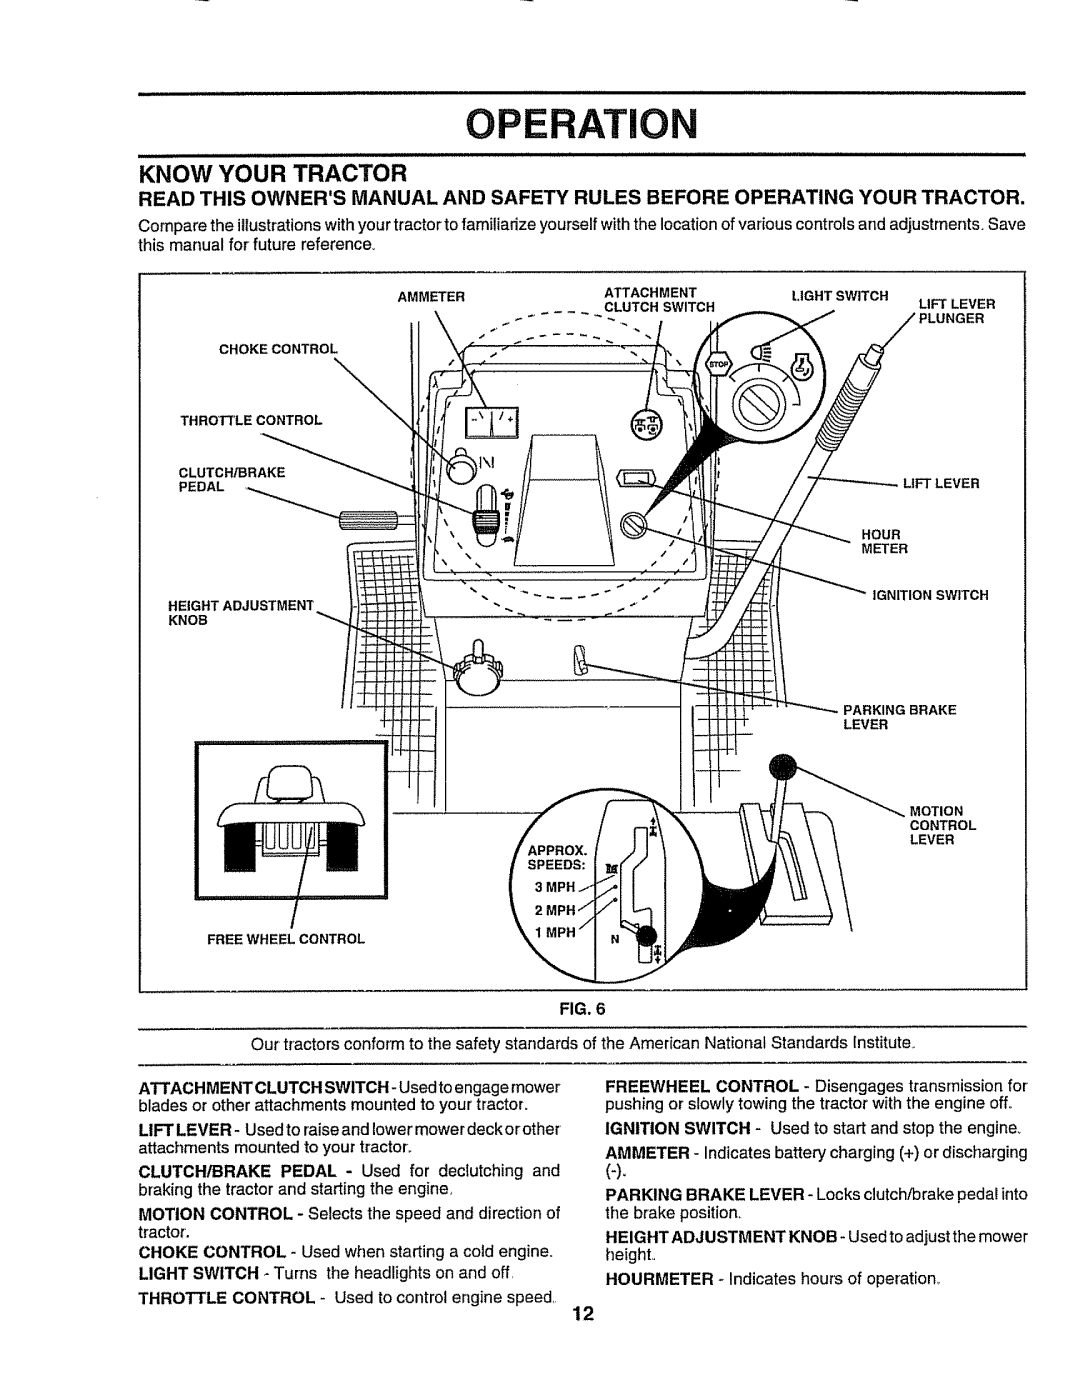 Craftsman 917.258911 owner manual Operati, Know Your Tractor, Fig 